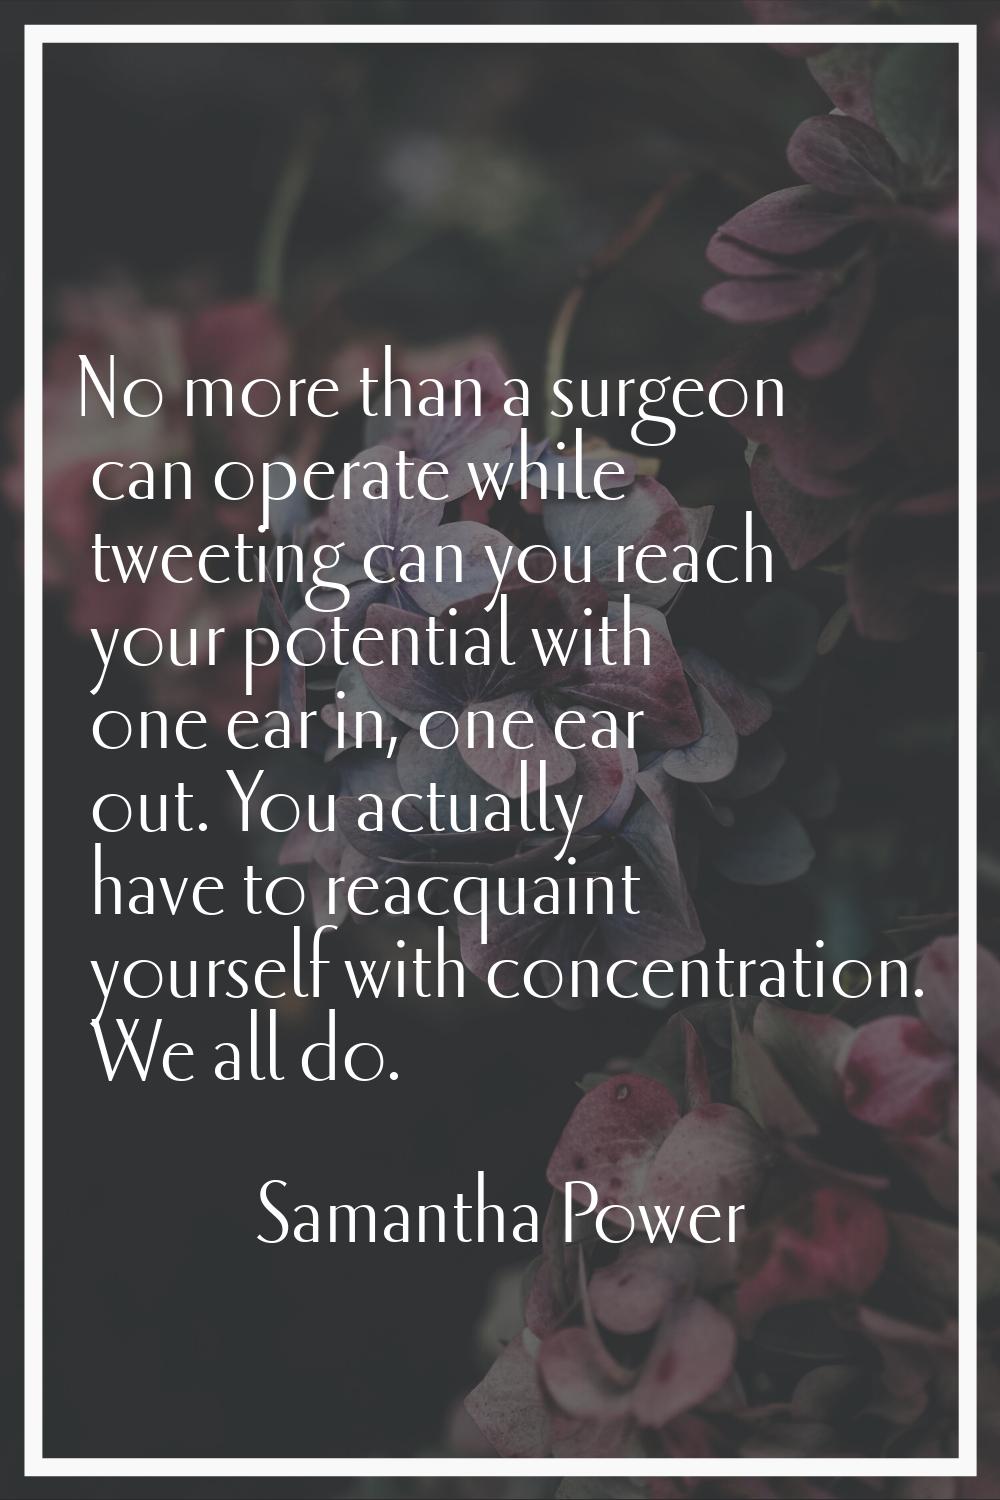 No more than a surgeon can operate while tweeting can you reach your potential with one ear in, one